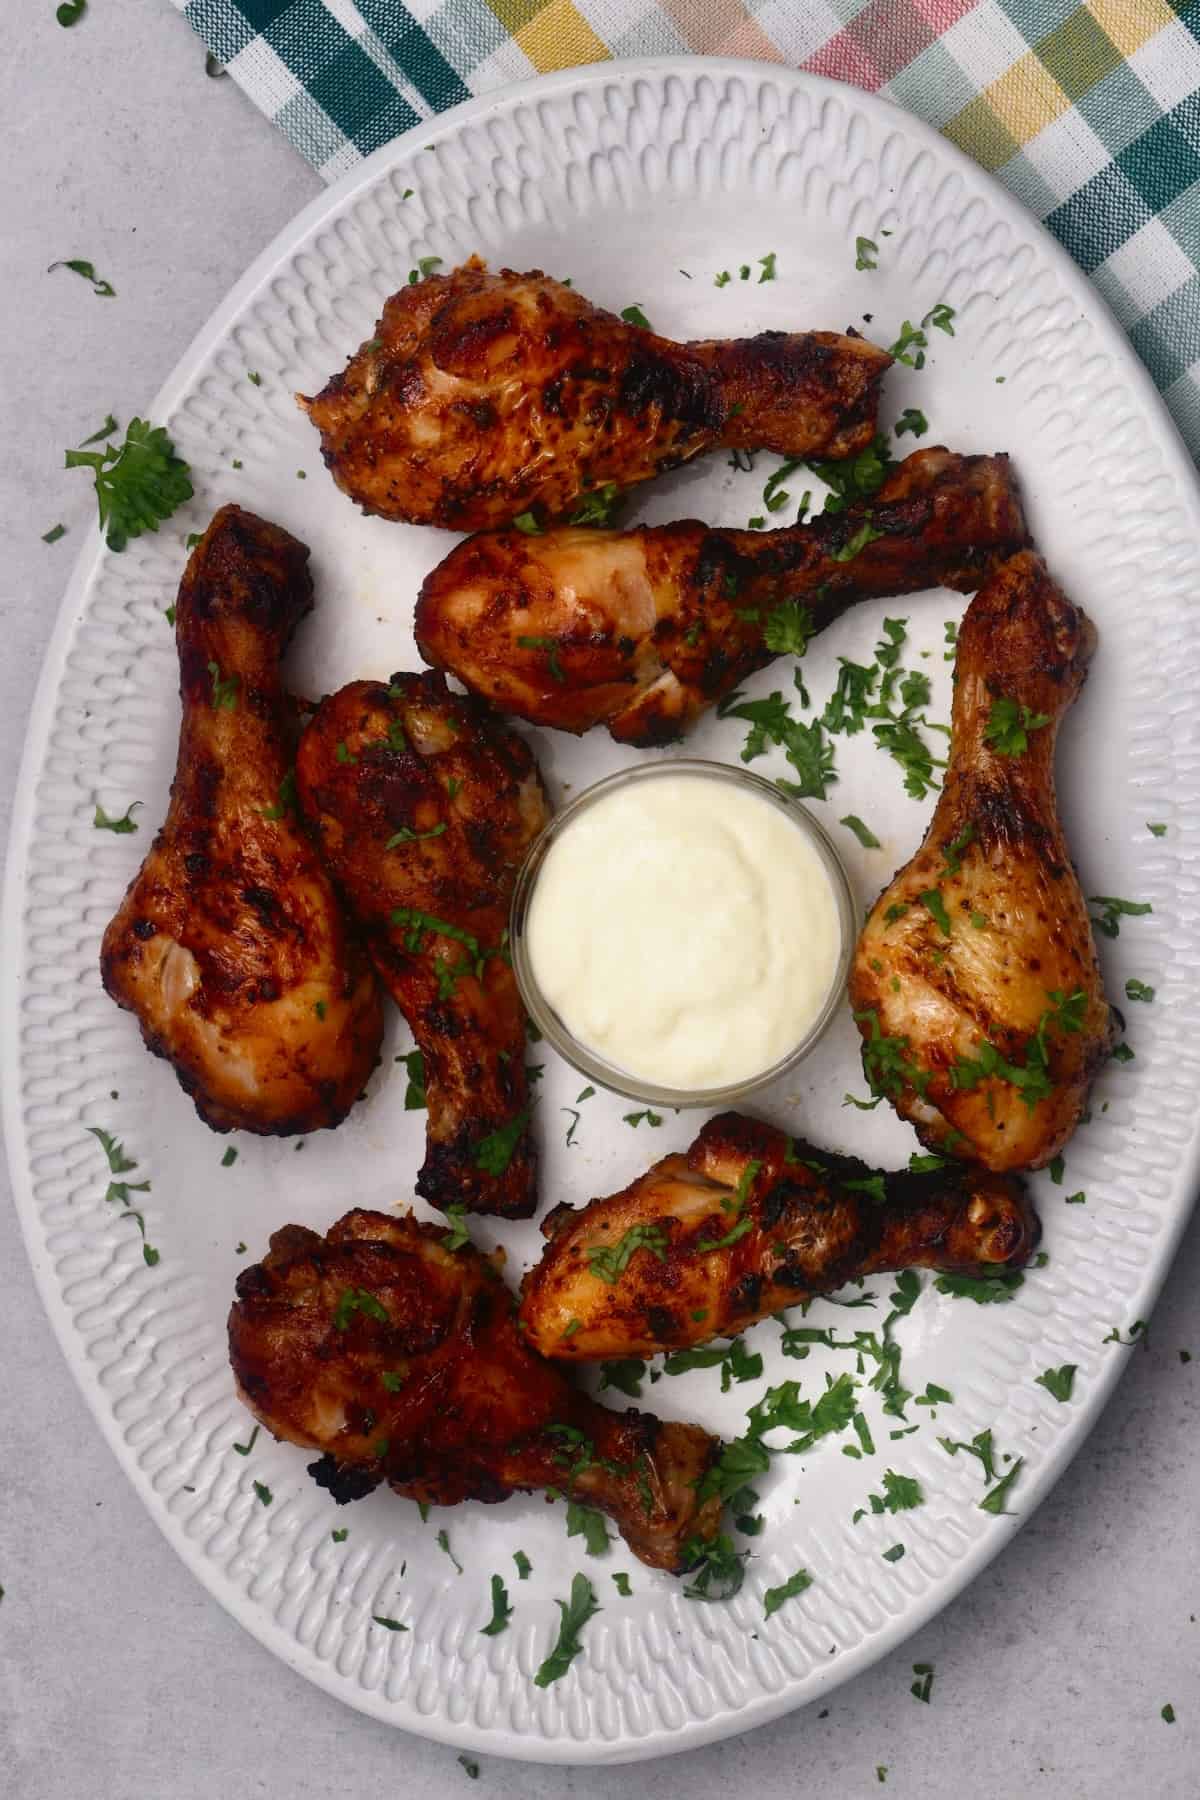 A small bowl of garlic aioli in the midst of chicken drumsticks